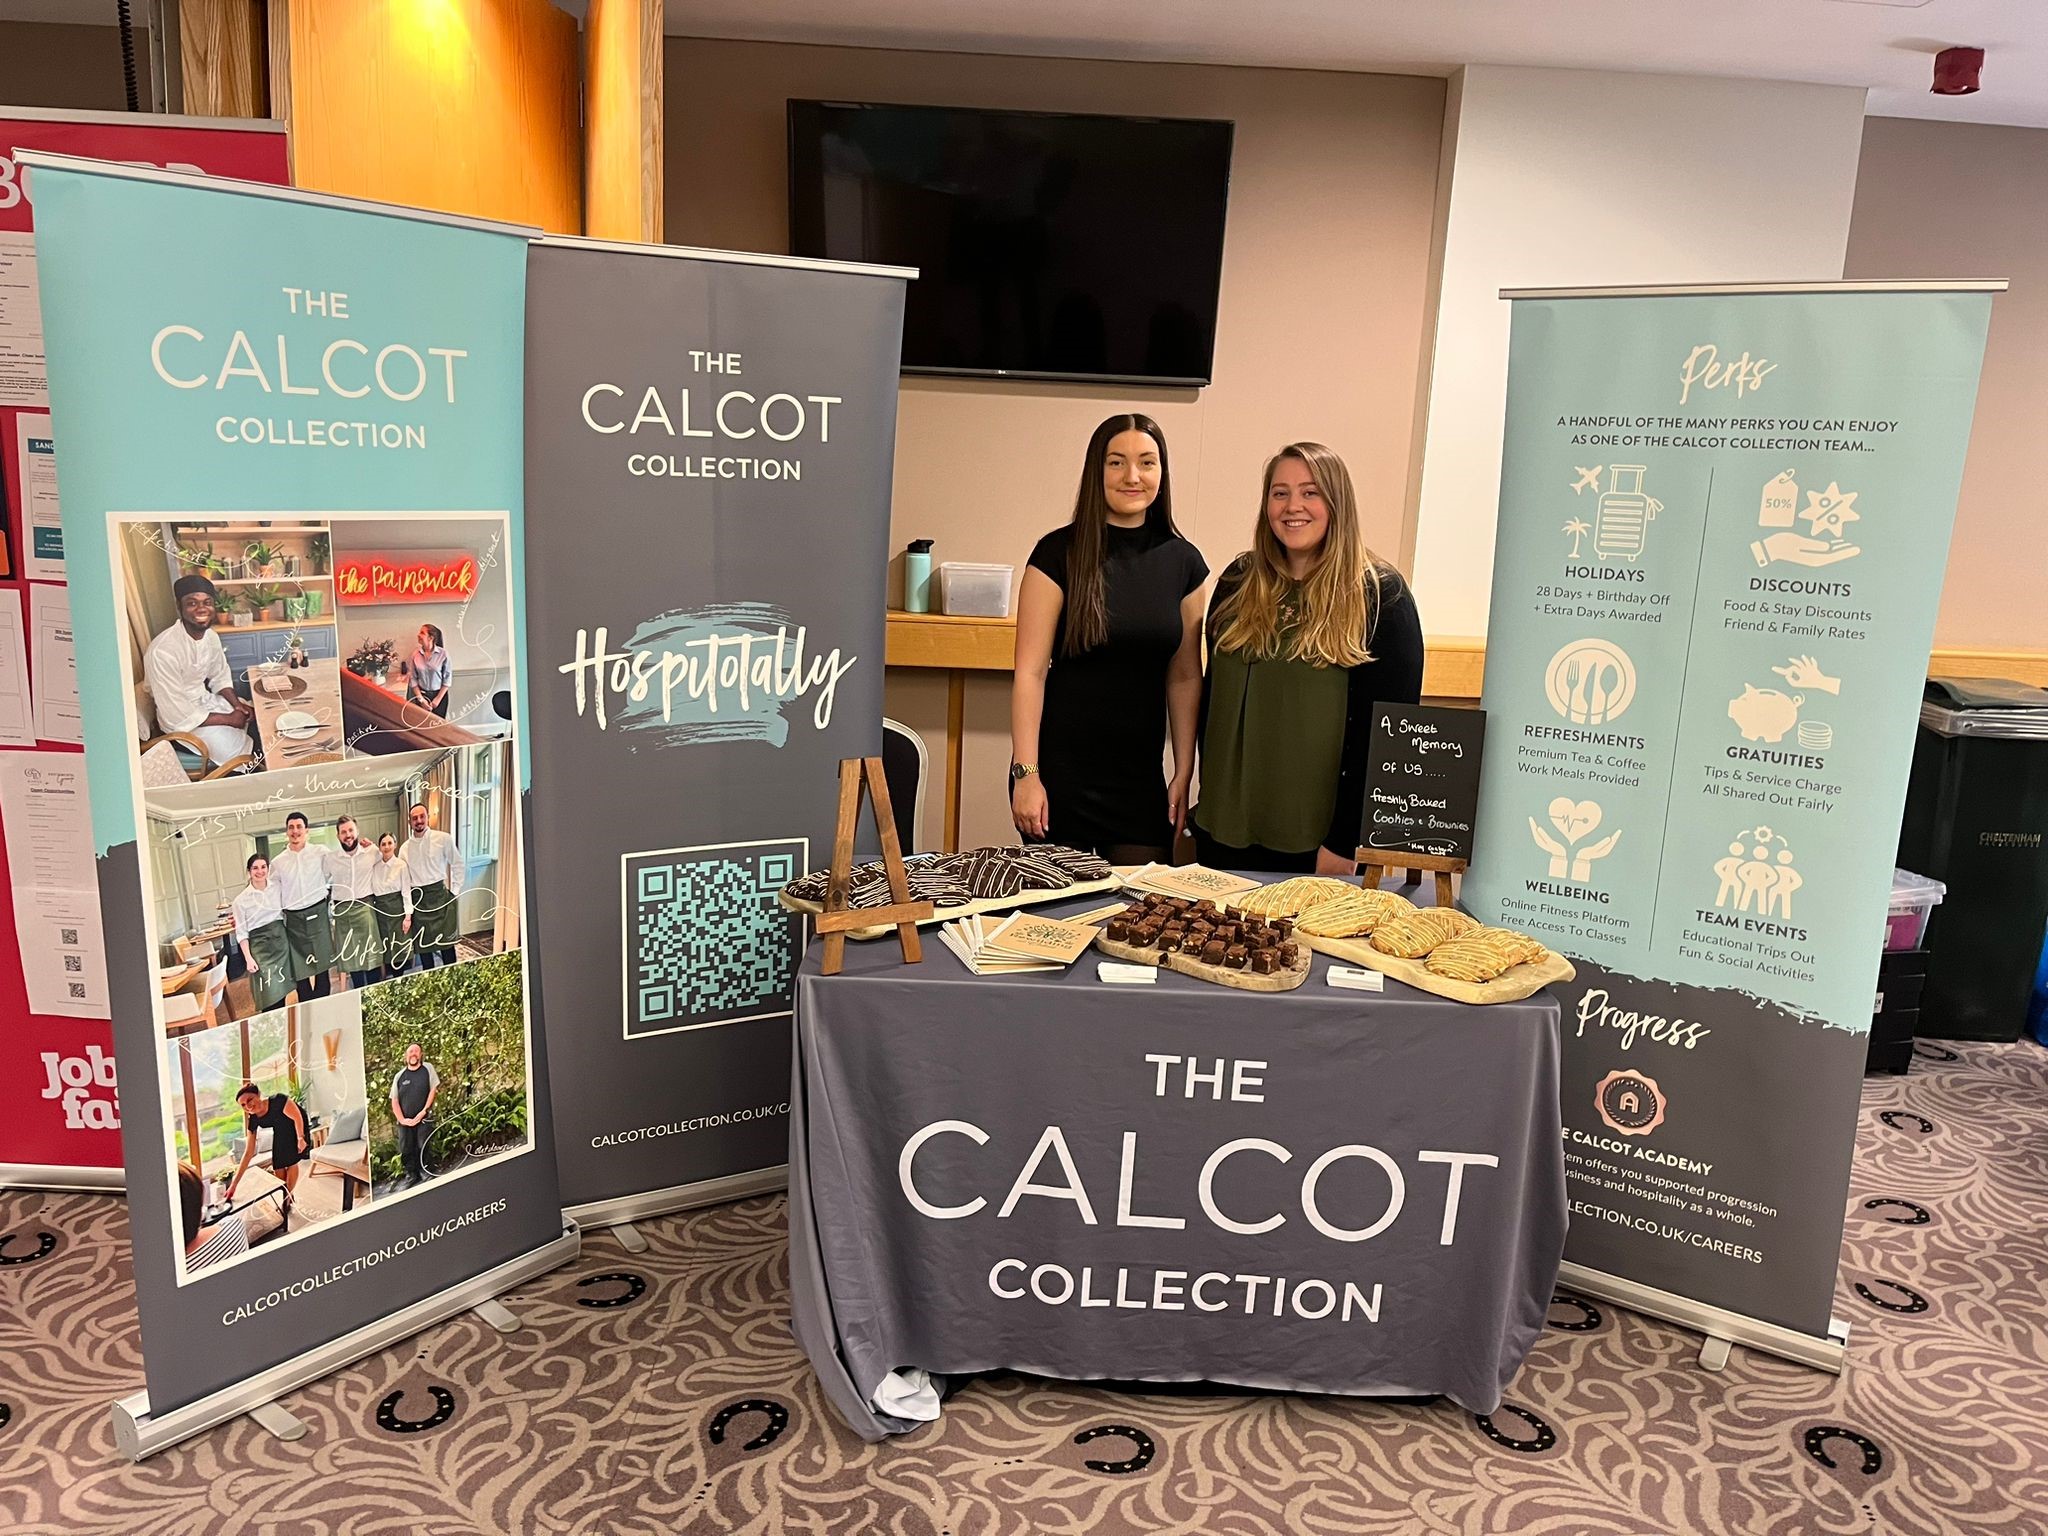 The Calcot Collection at our event in Cheltenham & Gloucester